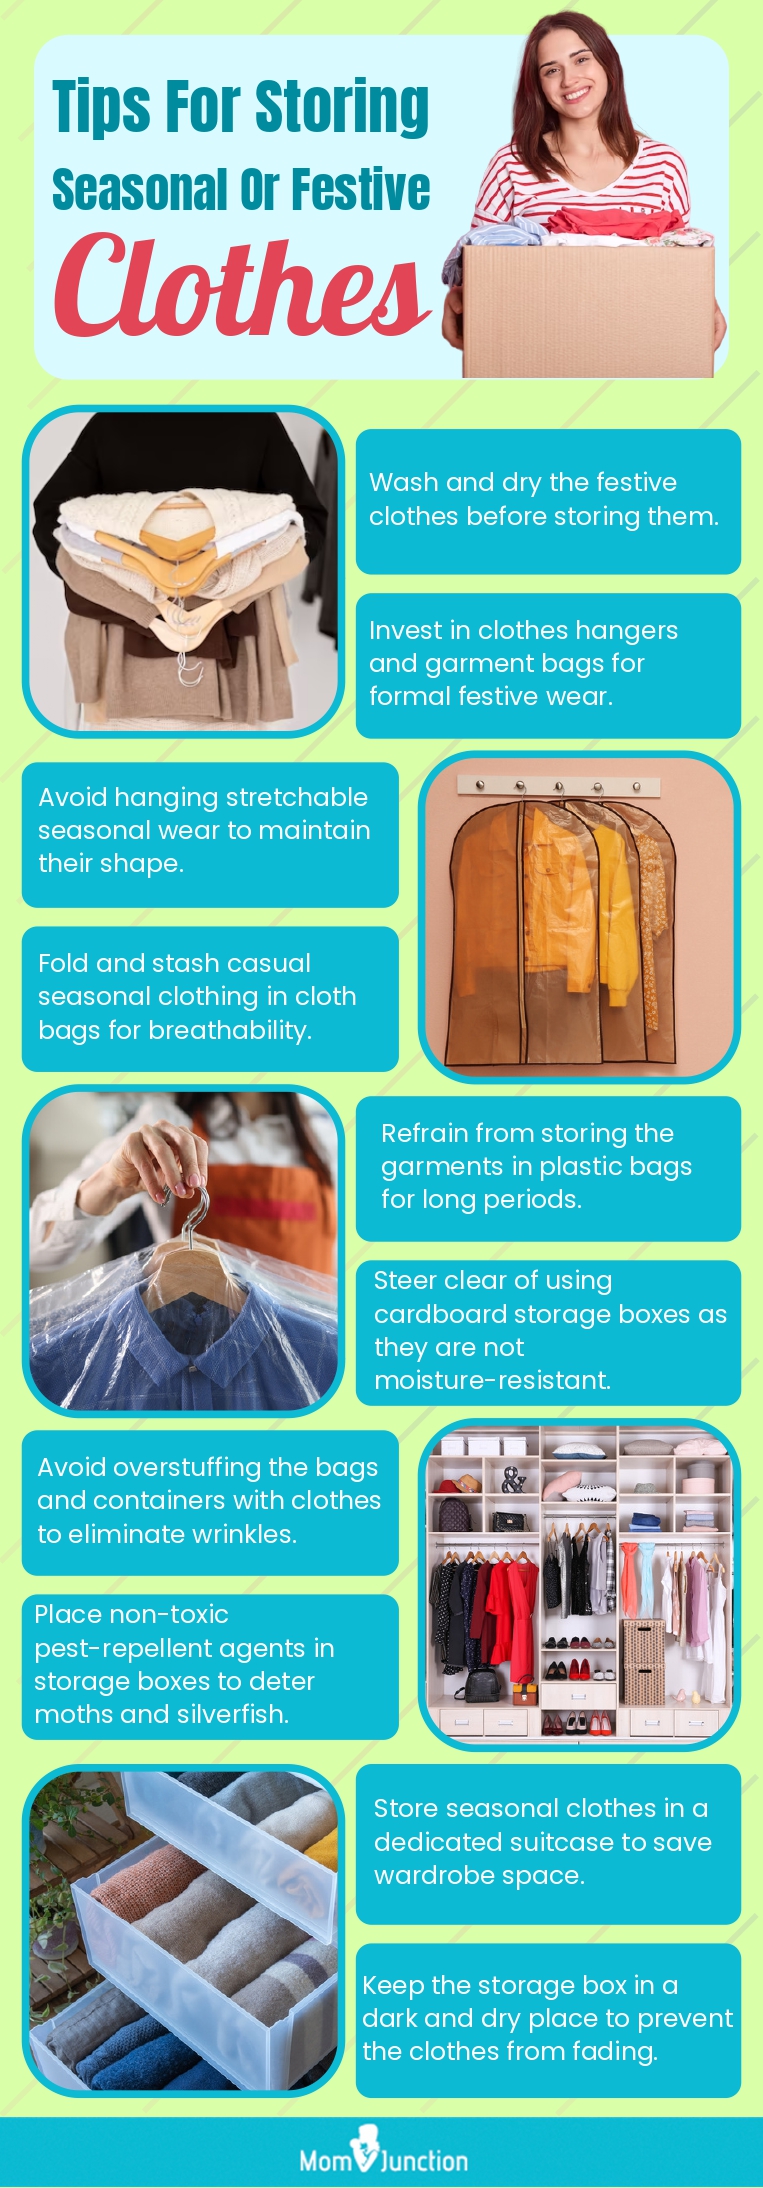 Tips For Storing Seasonal Or Festive Clothes (infographic)